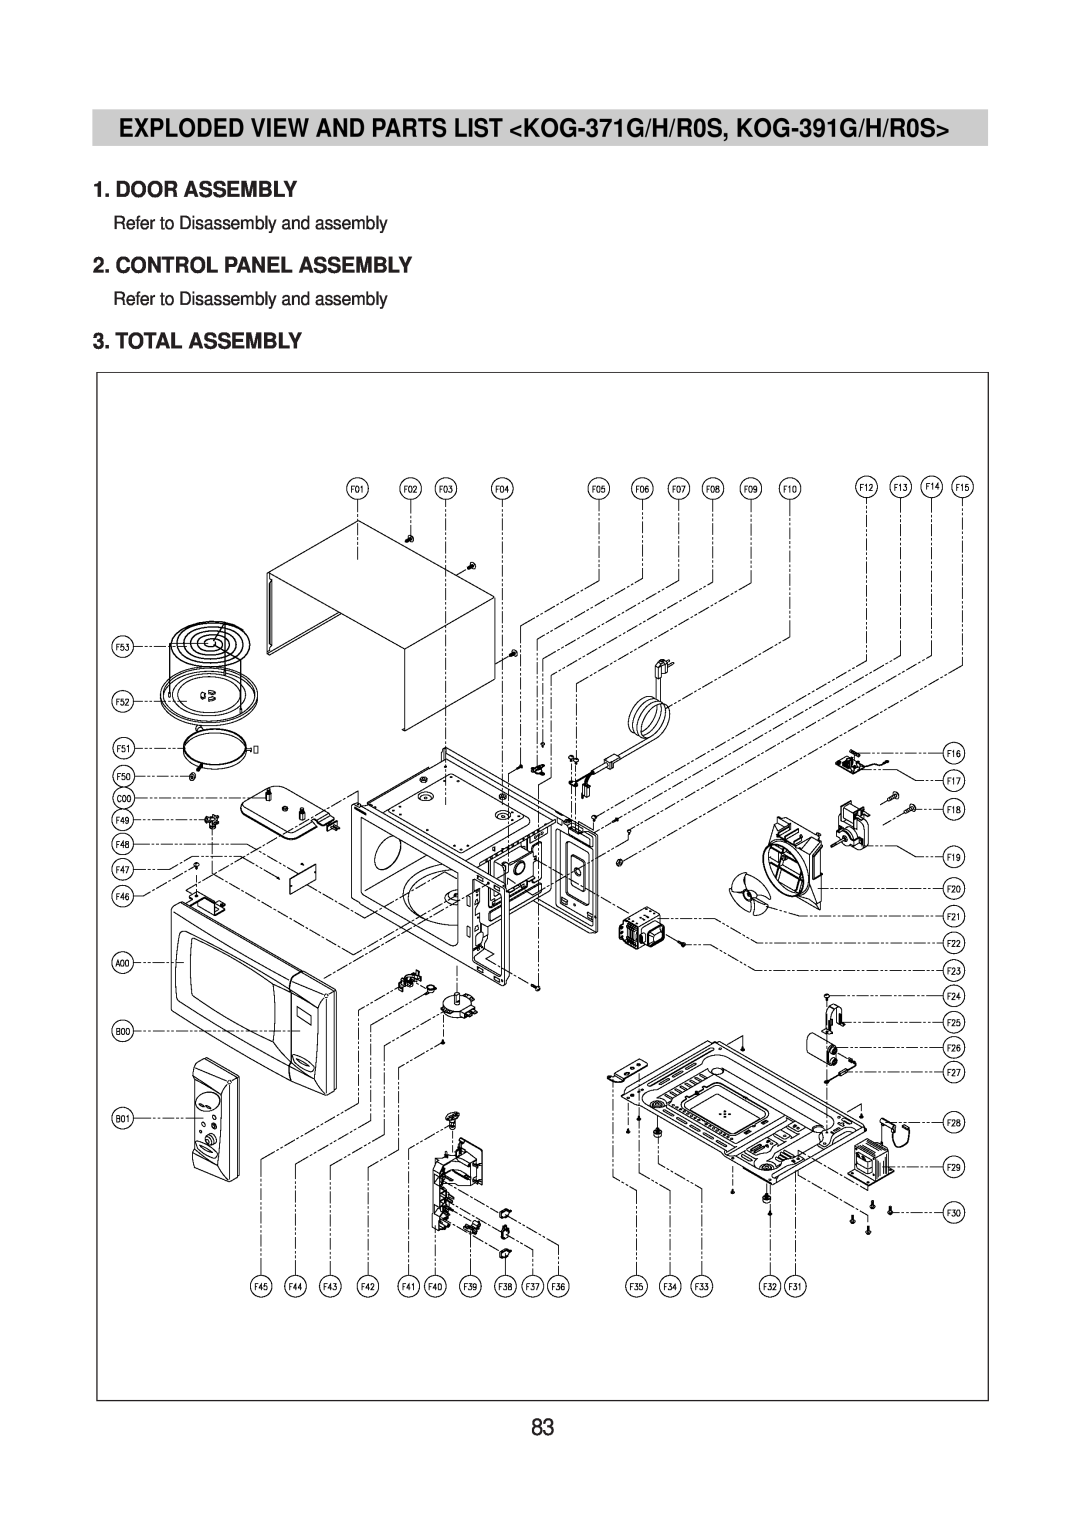 Daewoo KOG-375R0S EXPLODED VIEW AND PARTS LIST KOG-371G/H/R0S, KOG-391G/H/R0S, Door Assembly, Control Panel Assembly 